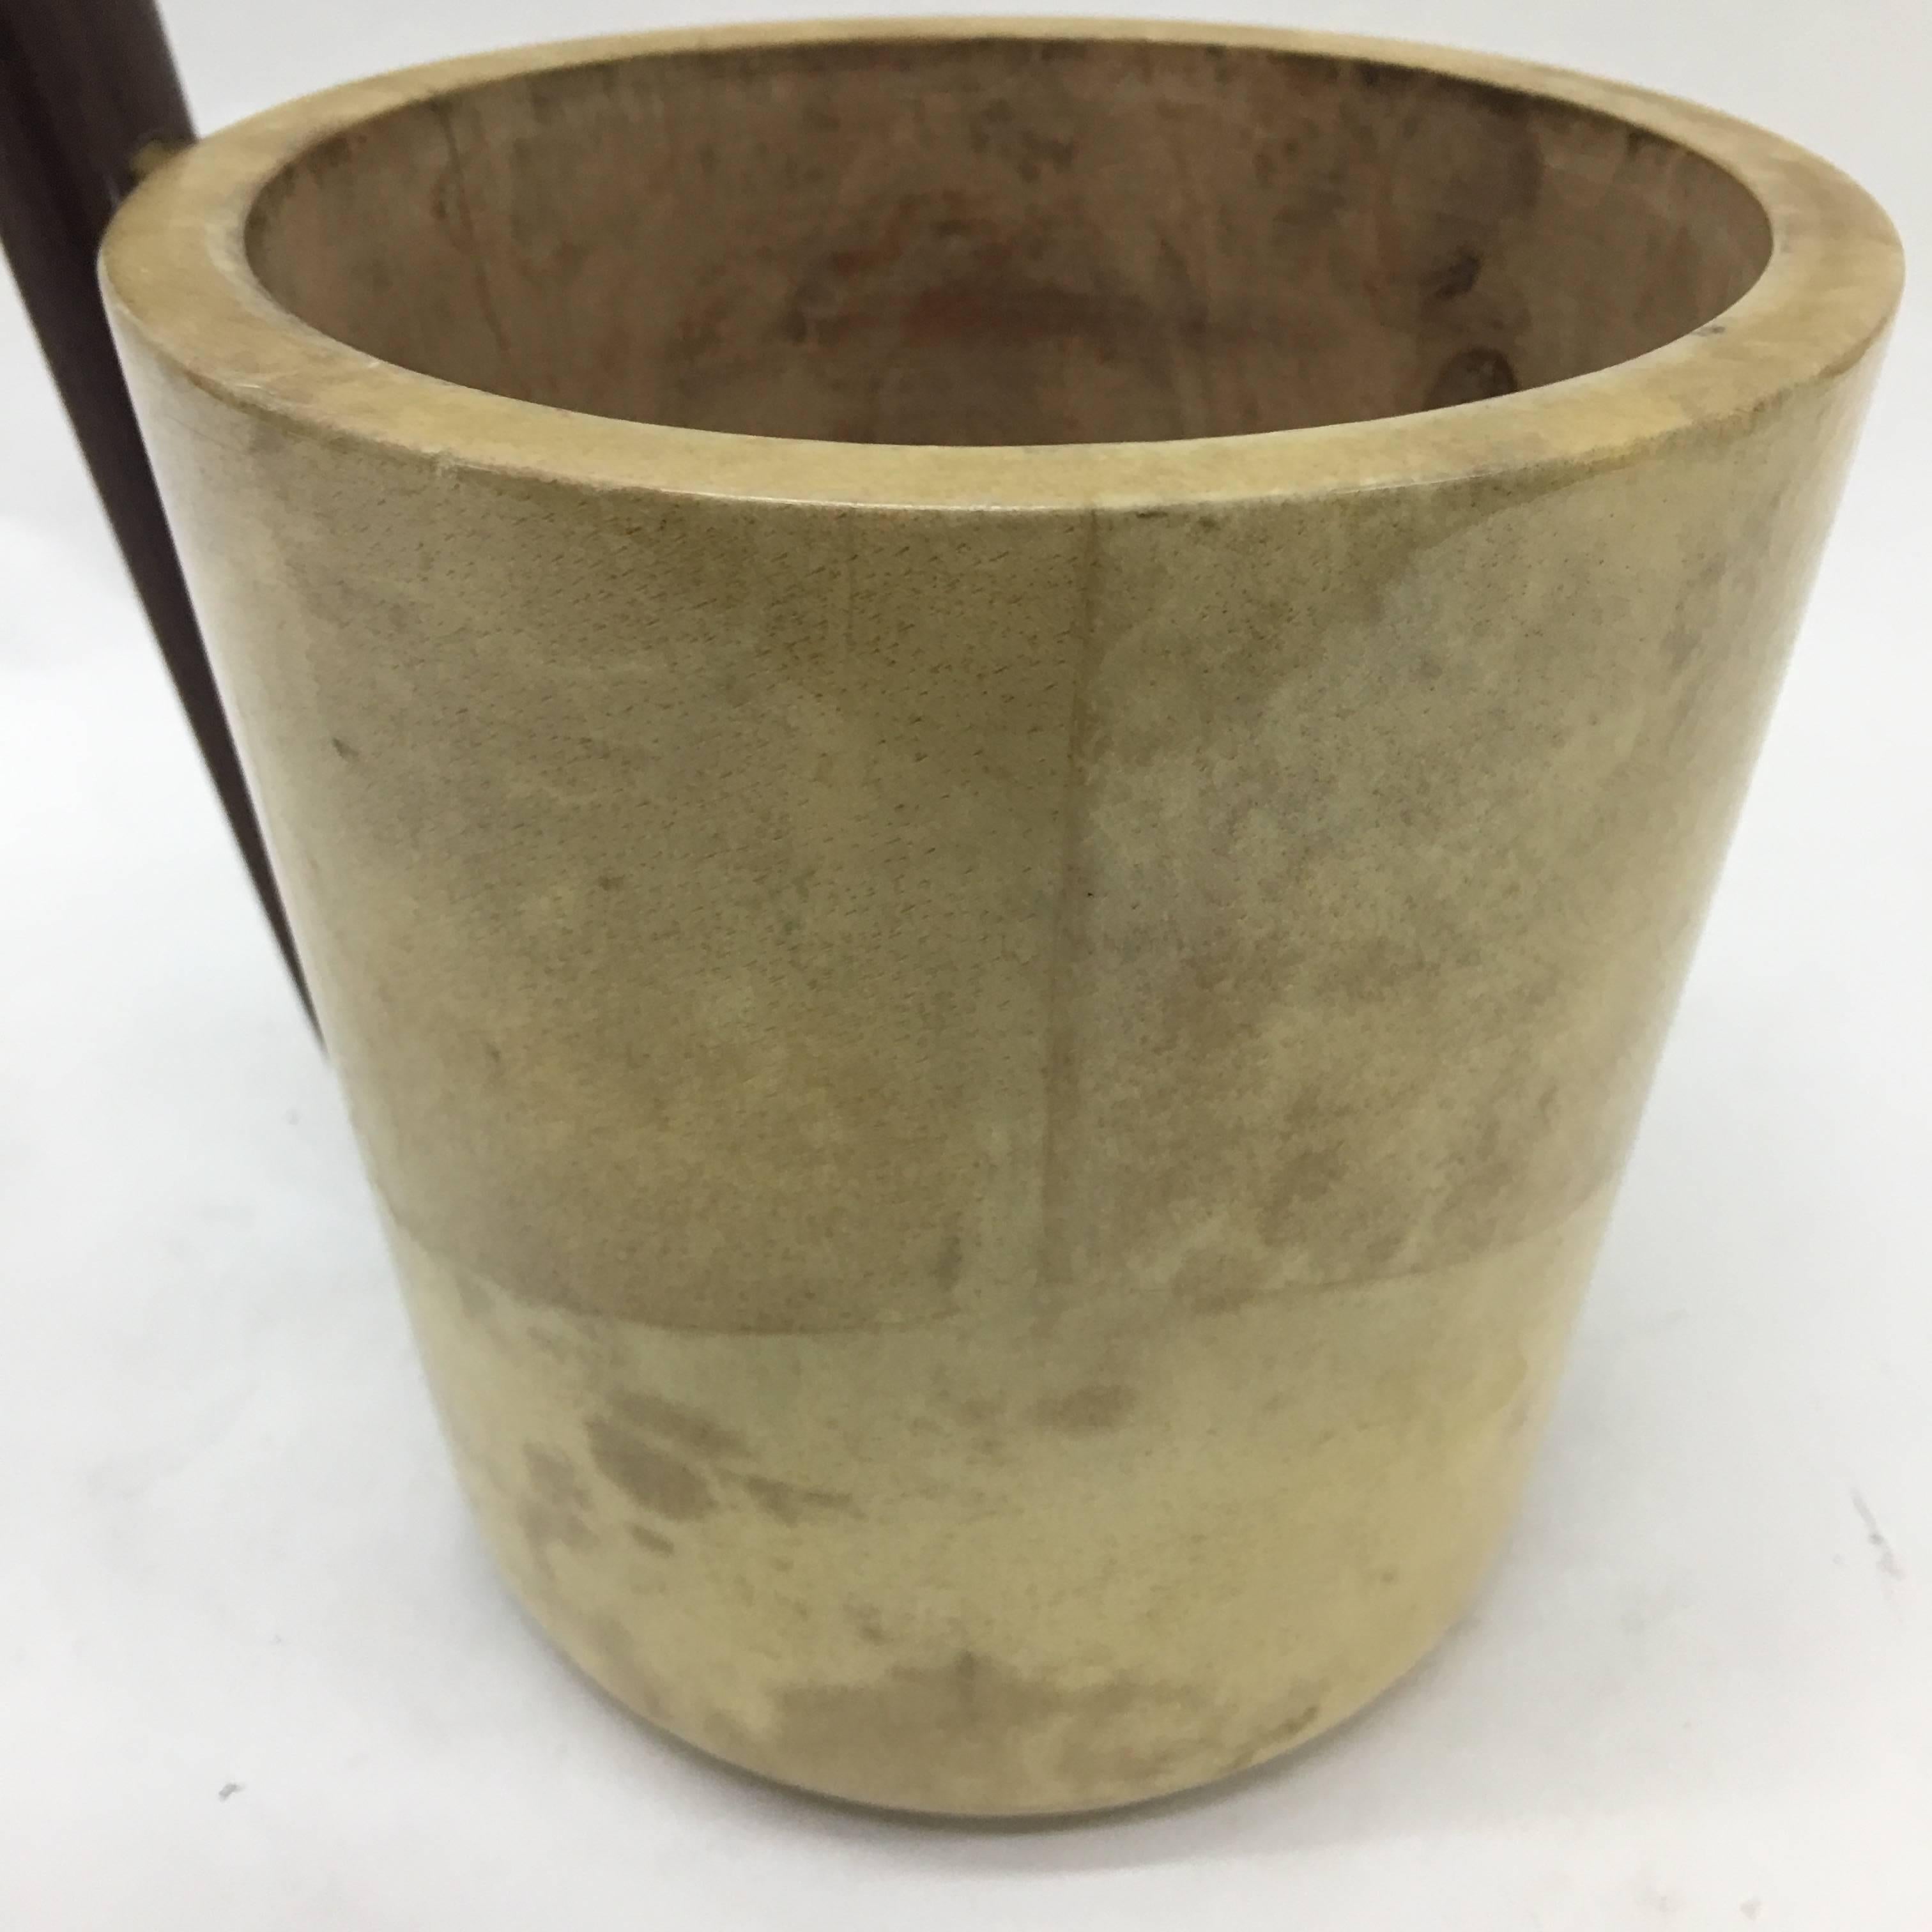 Wood Mid-Century Modern Pitcher by Aldo Tura for Macabo, circa 1960